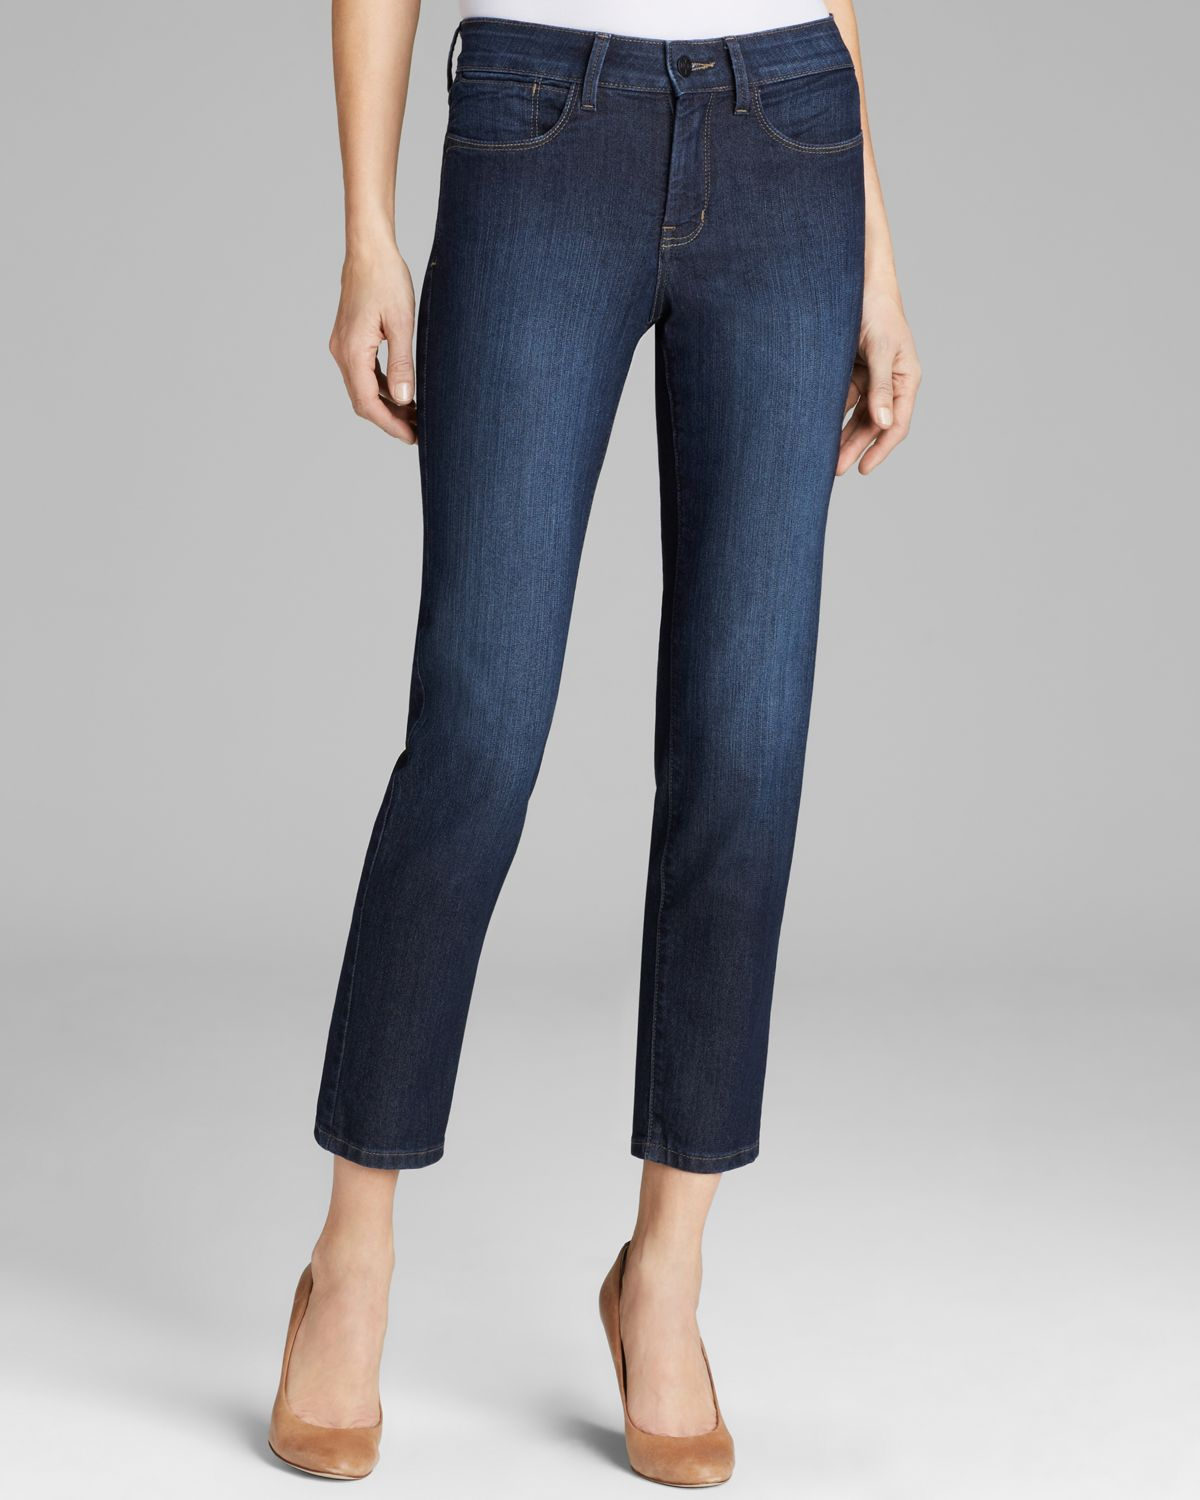 Lyst - NYDJ Clarissa Ankle Jeans in Cypress in Blue